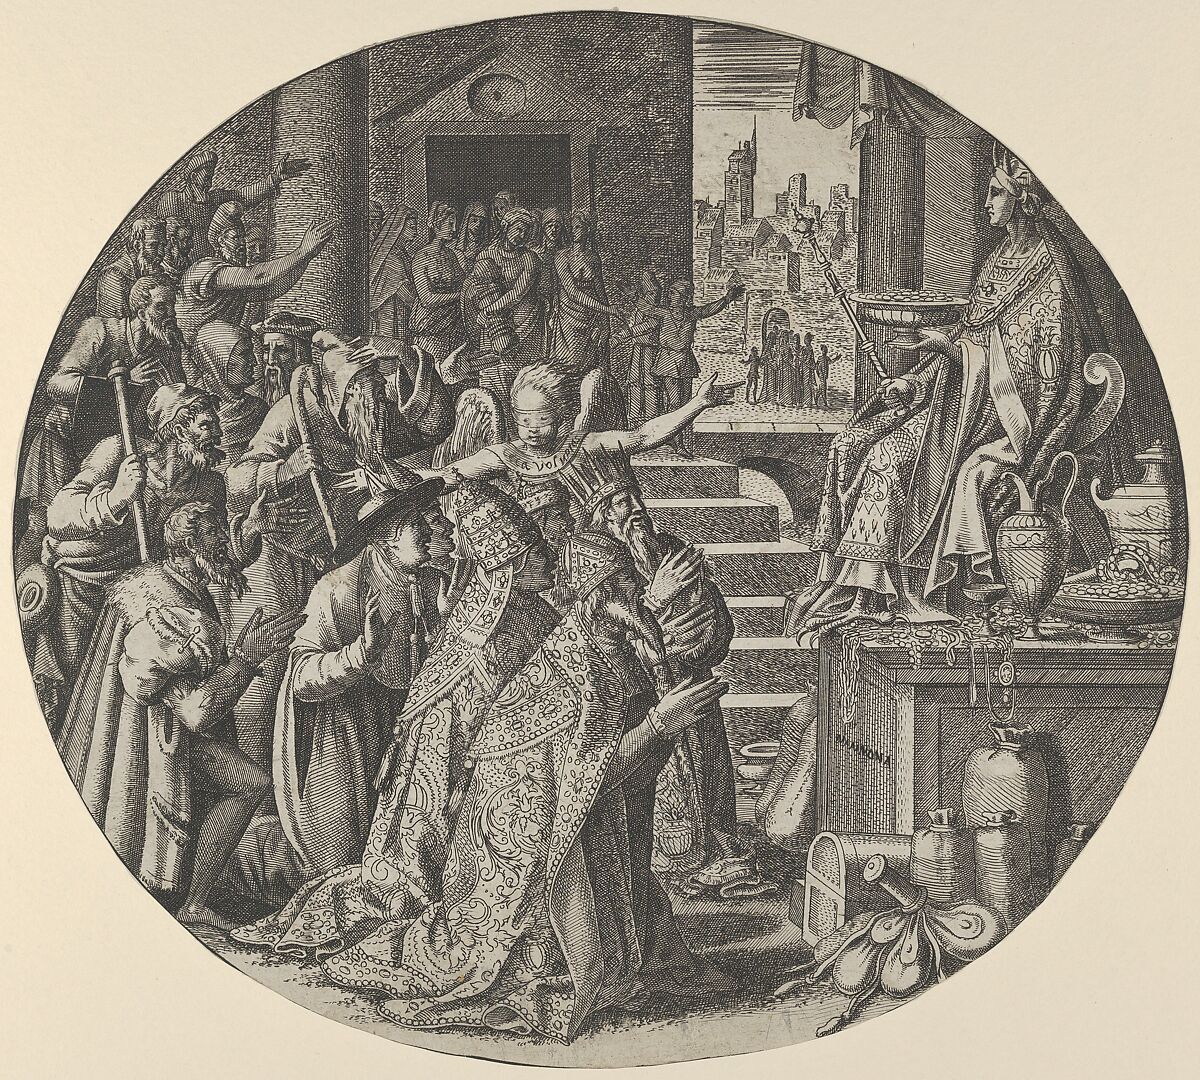 Avarice, Léon Davent (French, active 1540–56), Etching 